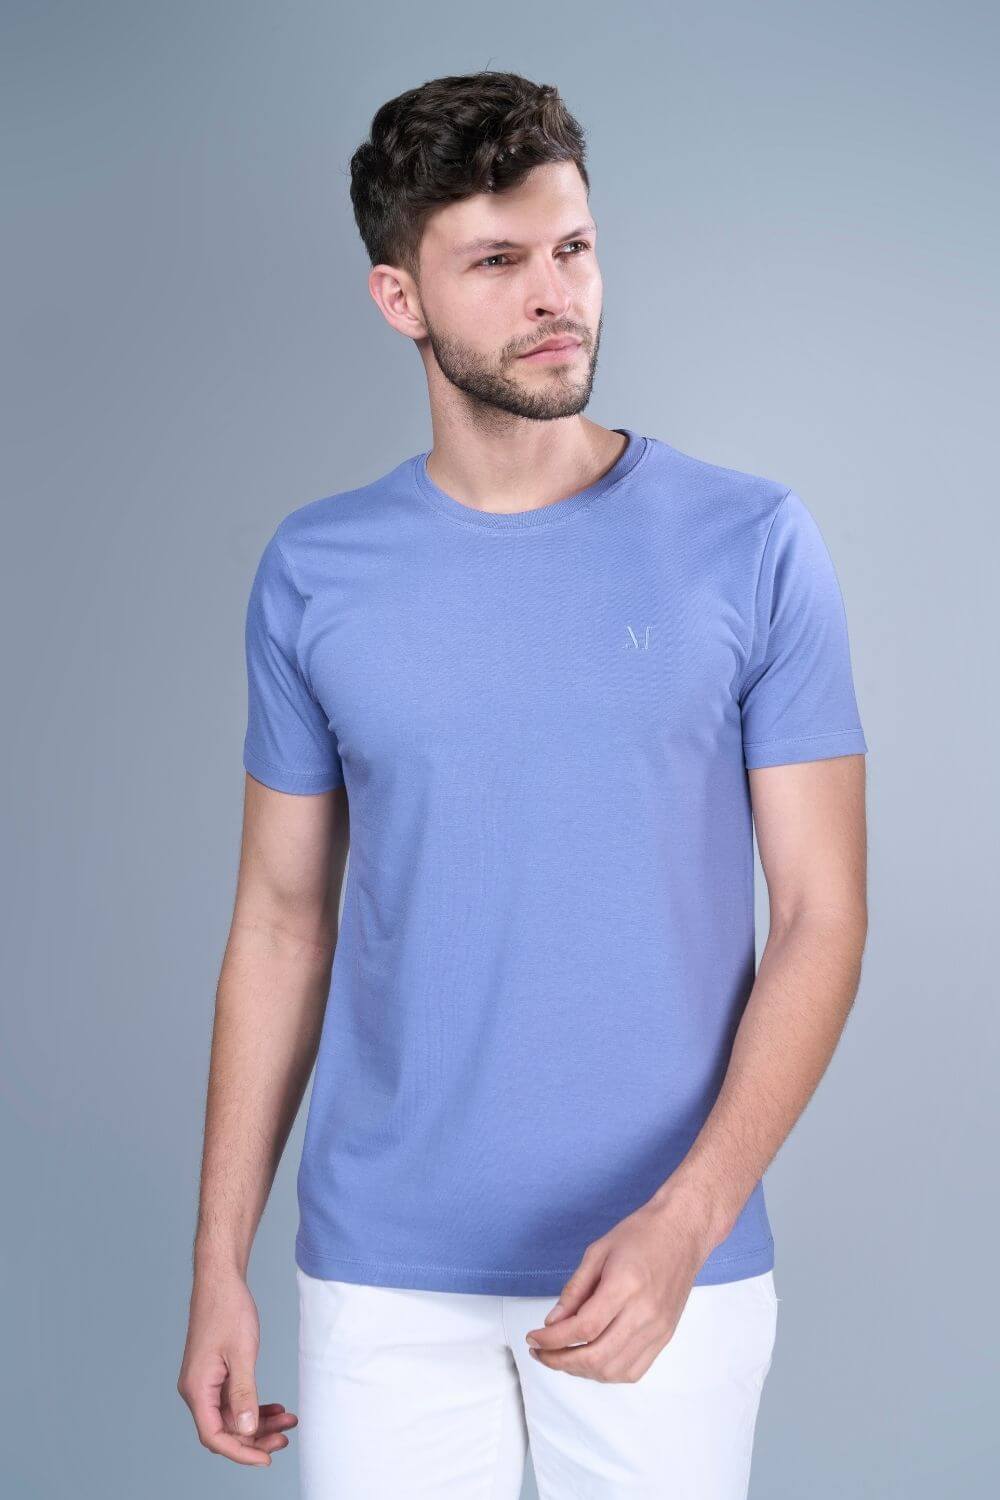 Blue colored, cotton solid T shirt for men with half sleeves and round neck from vibgyor series collection, full view.